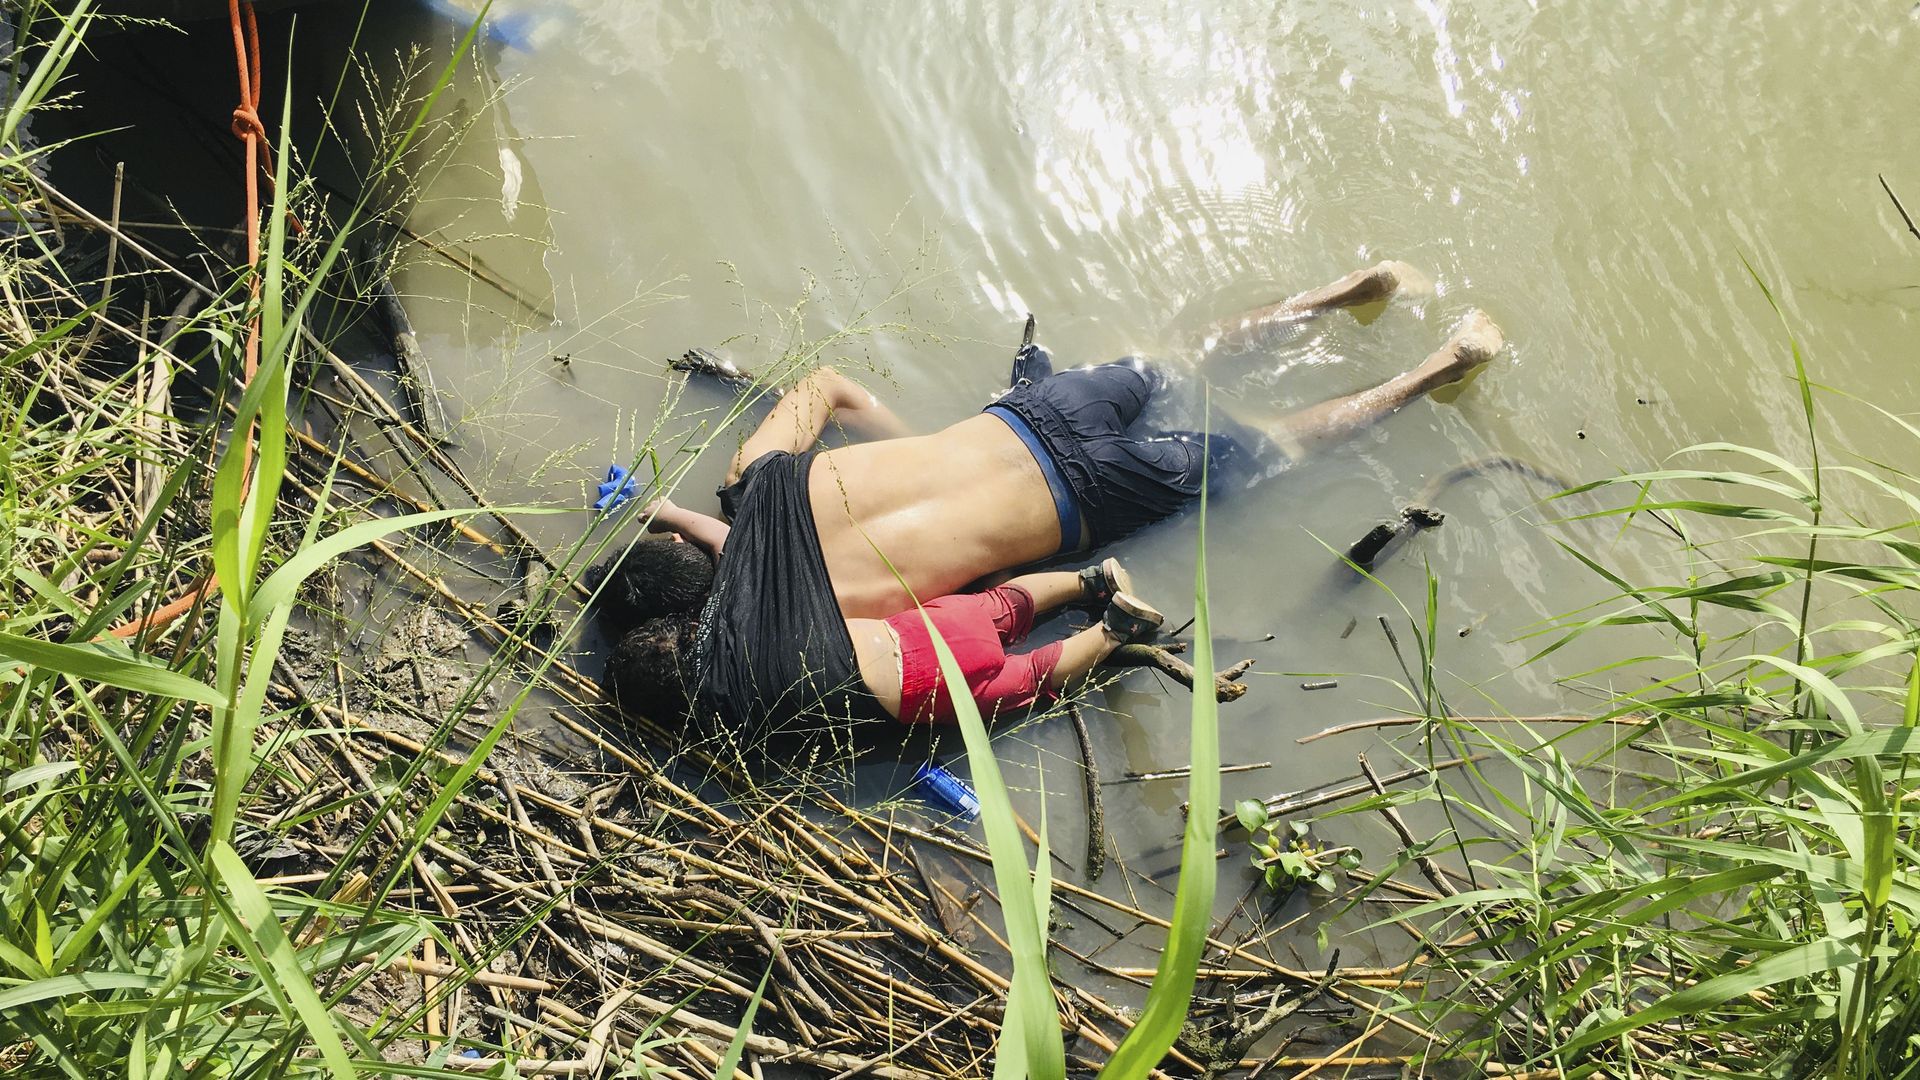 A father and his daughter drowned trying to migrate to the U.S.